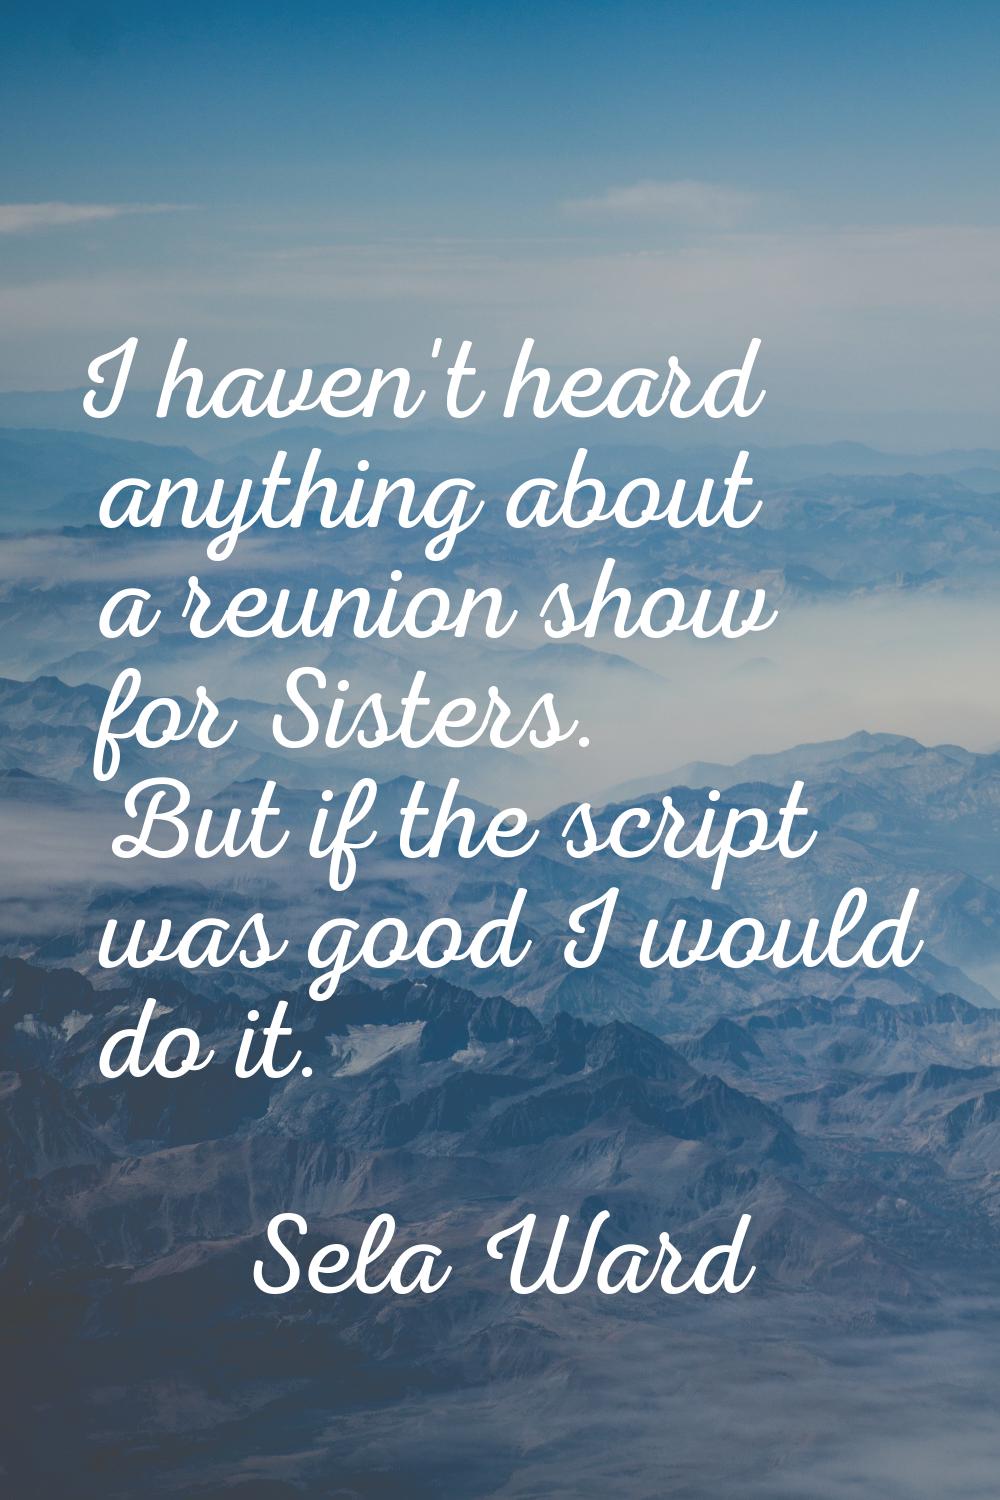 I haven't heard anything about a reunion show for Sisters. But if the script was good I would do it